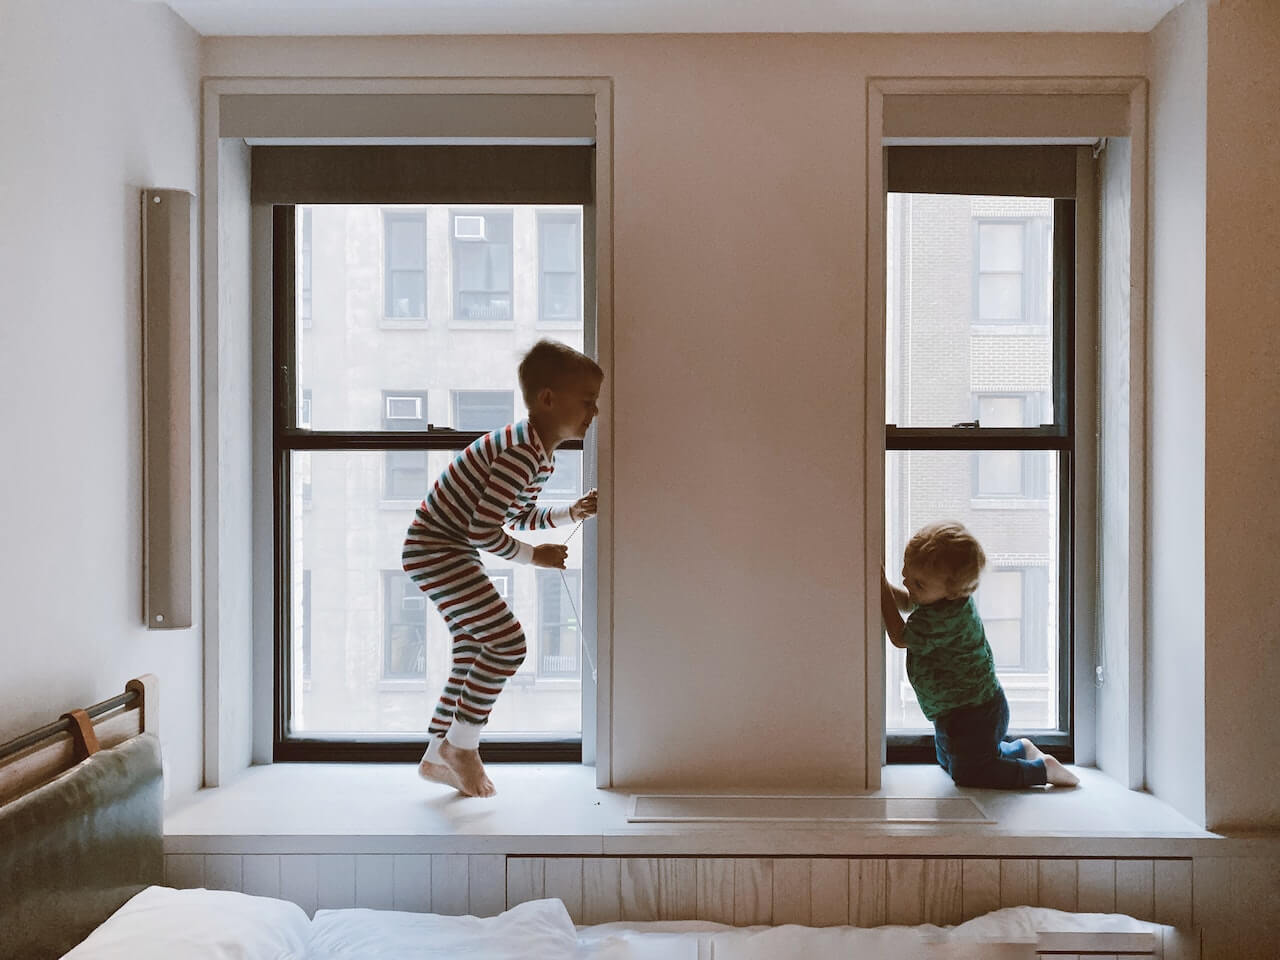 Kids playing in their room by the window.